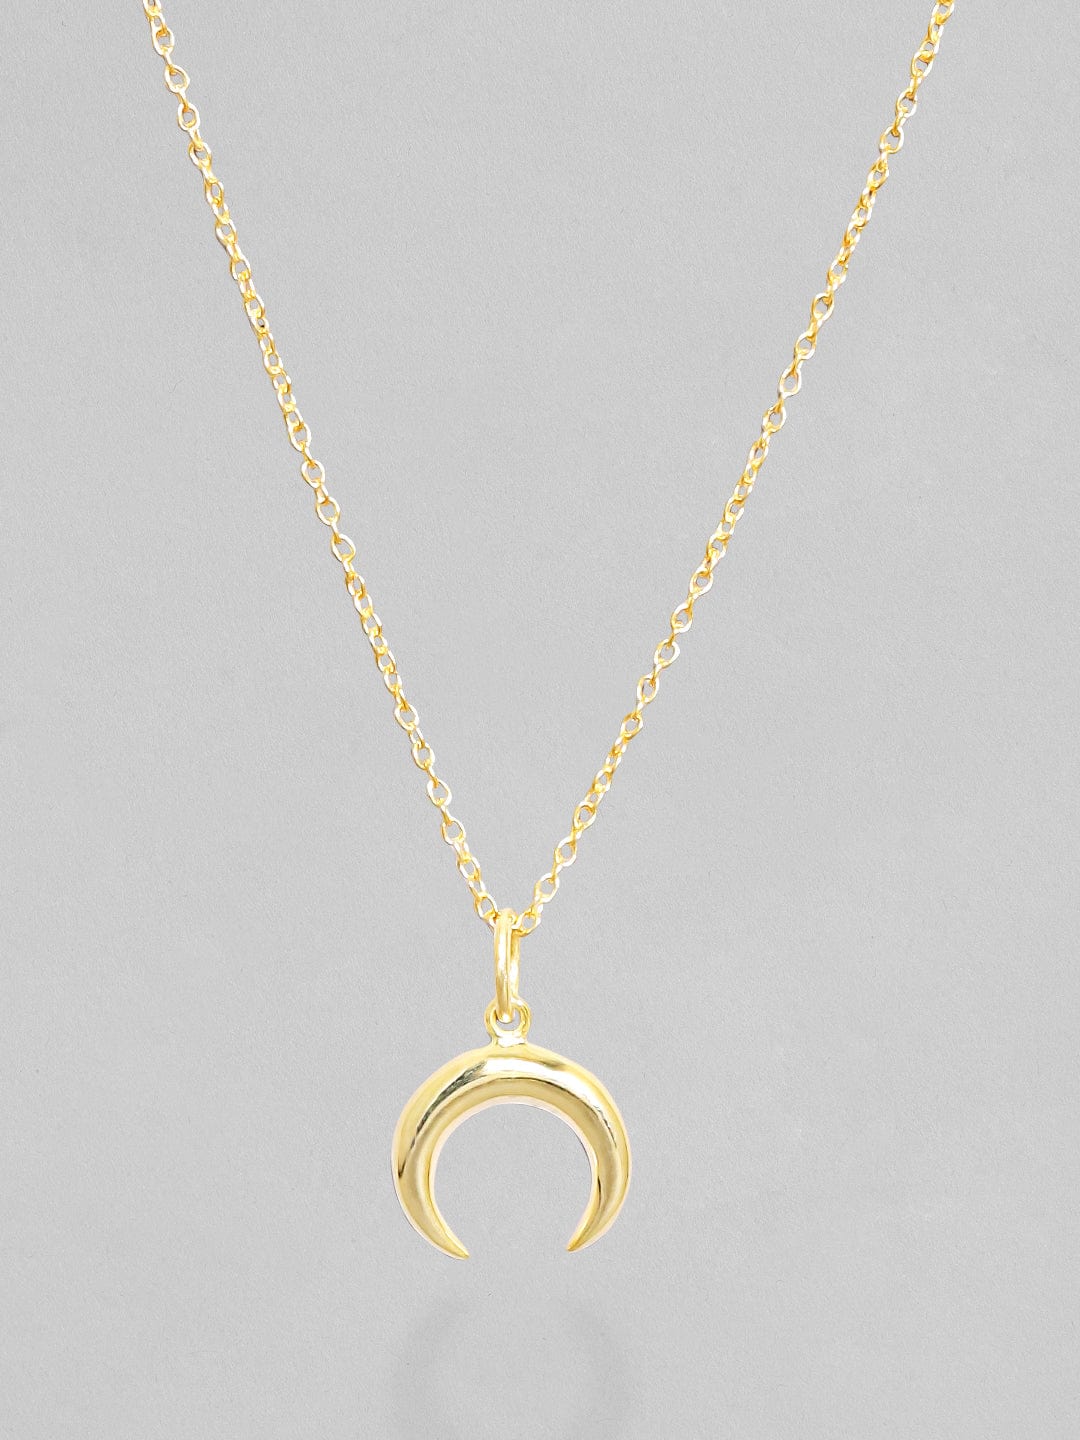 Small moon - dark side, solid 9ct gold – Fay Page